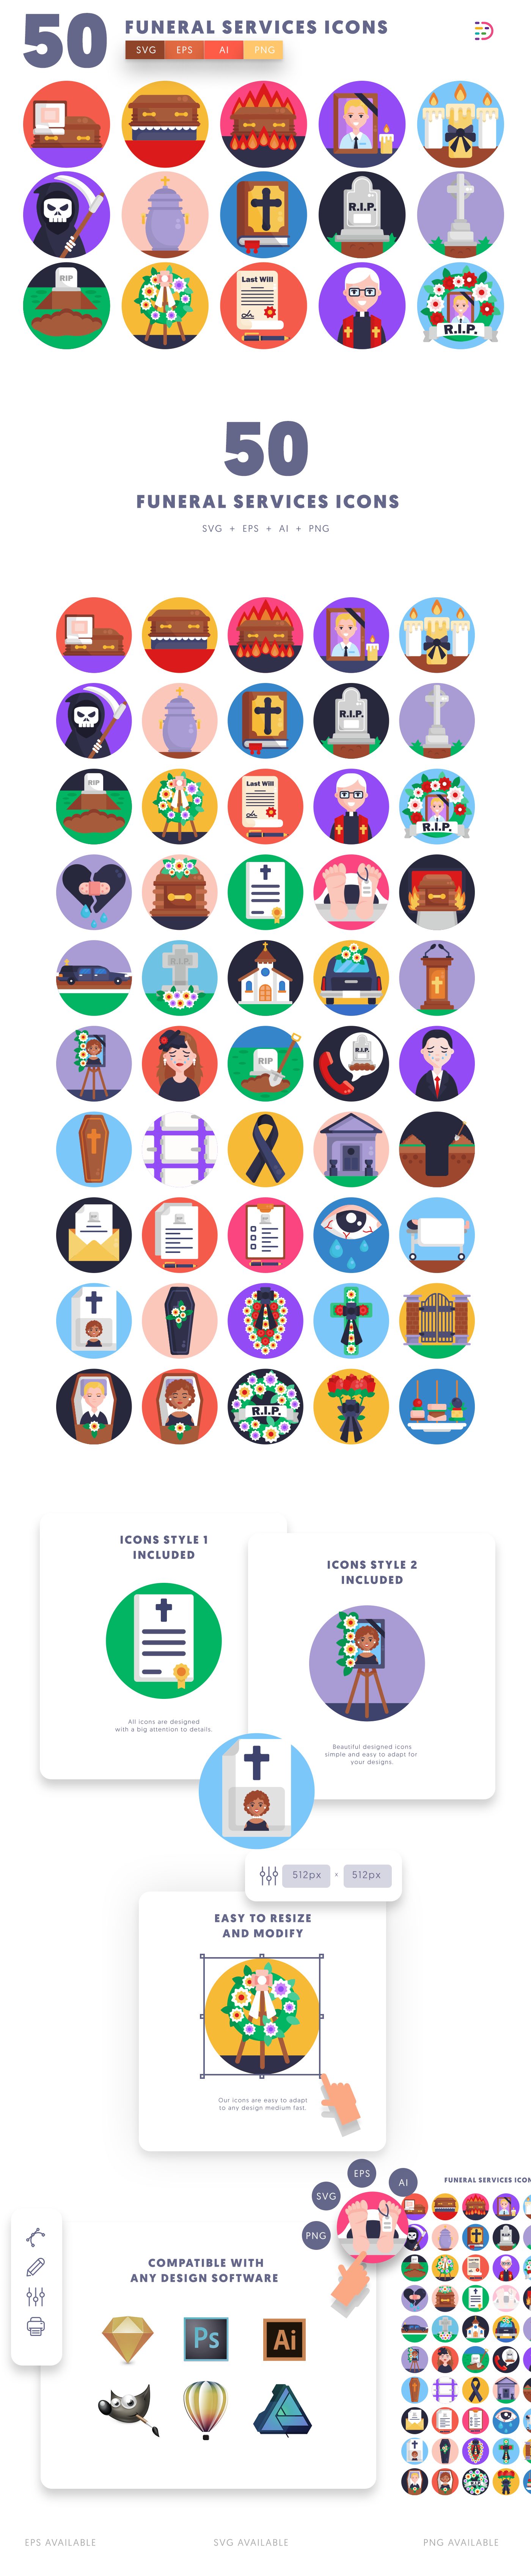 Funeral Services icons info graphic